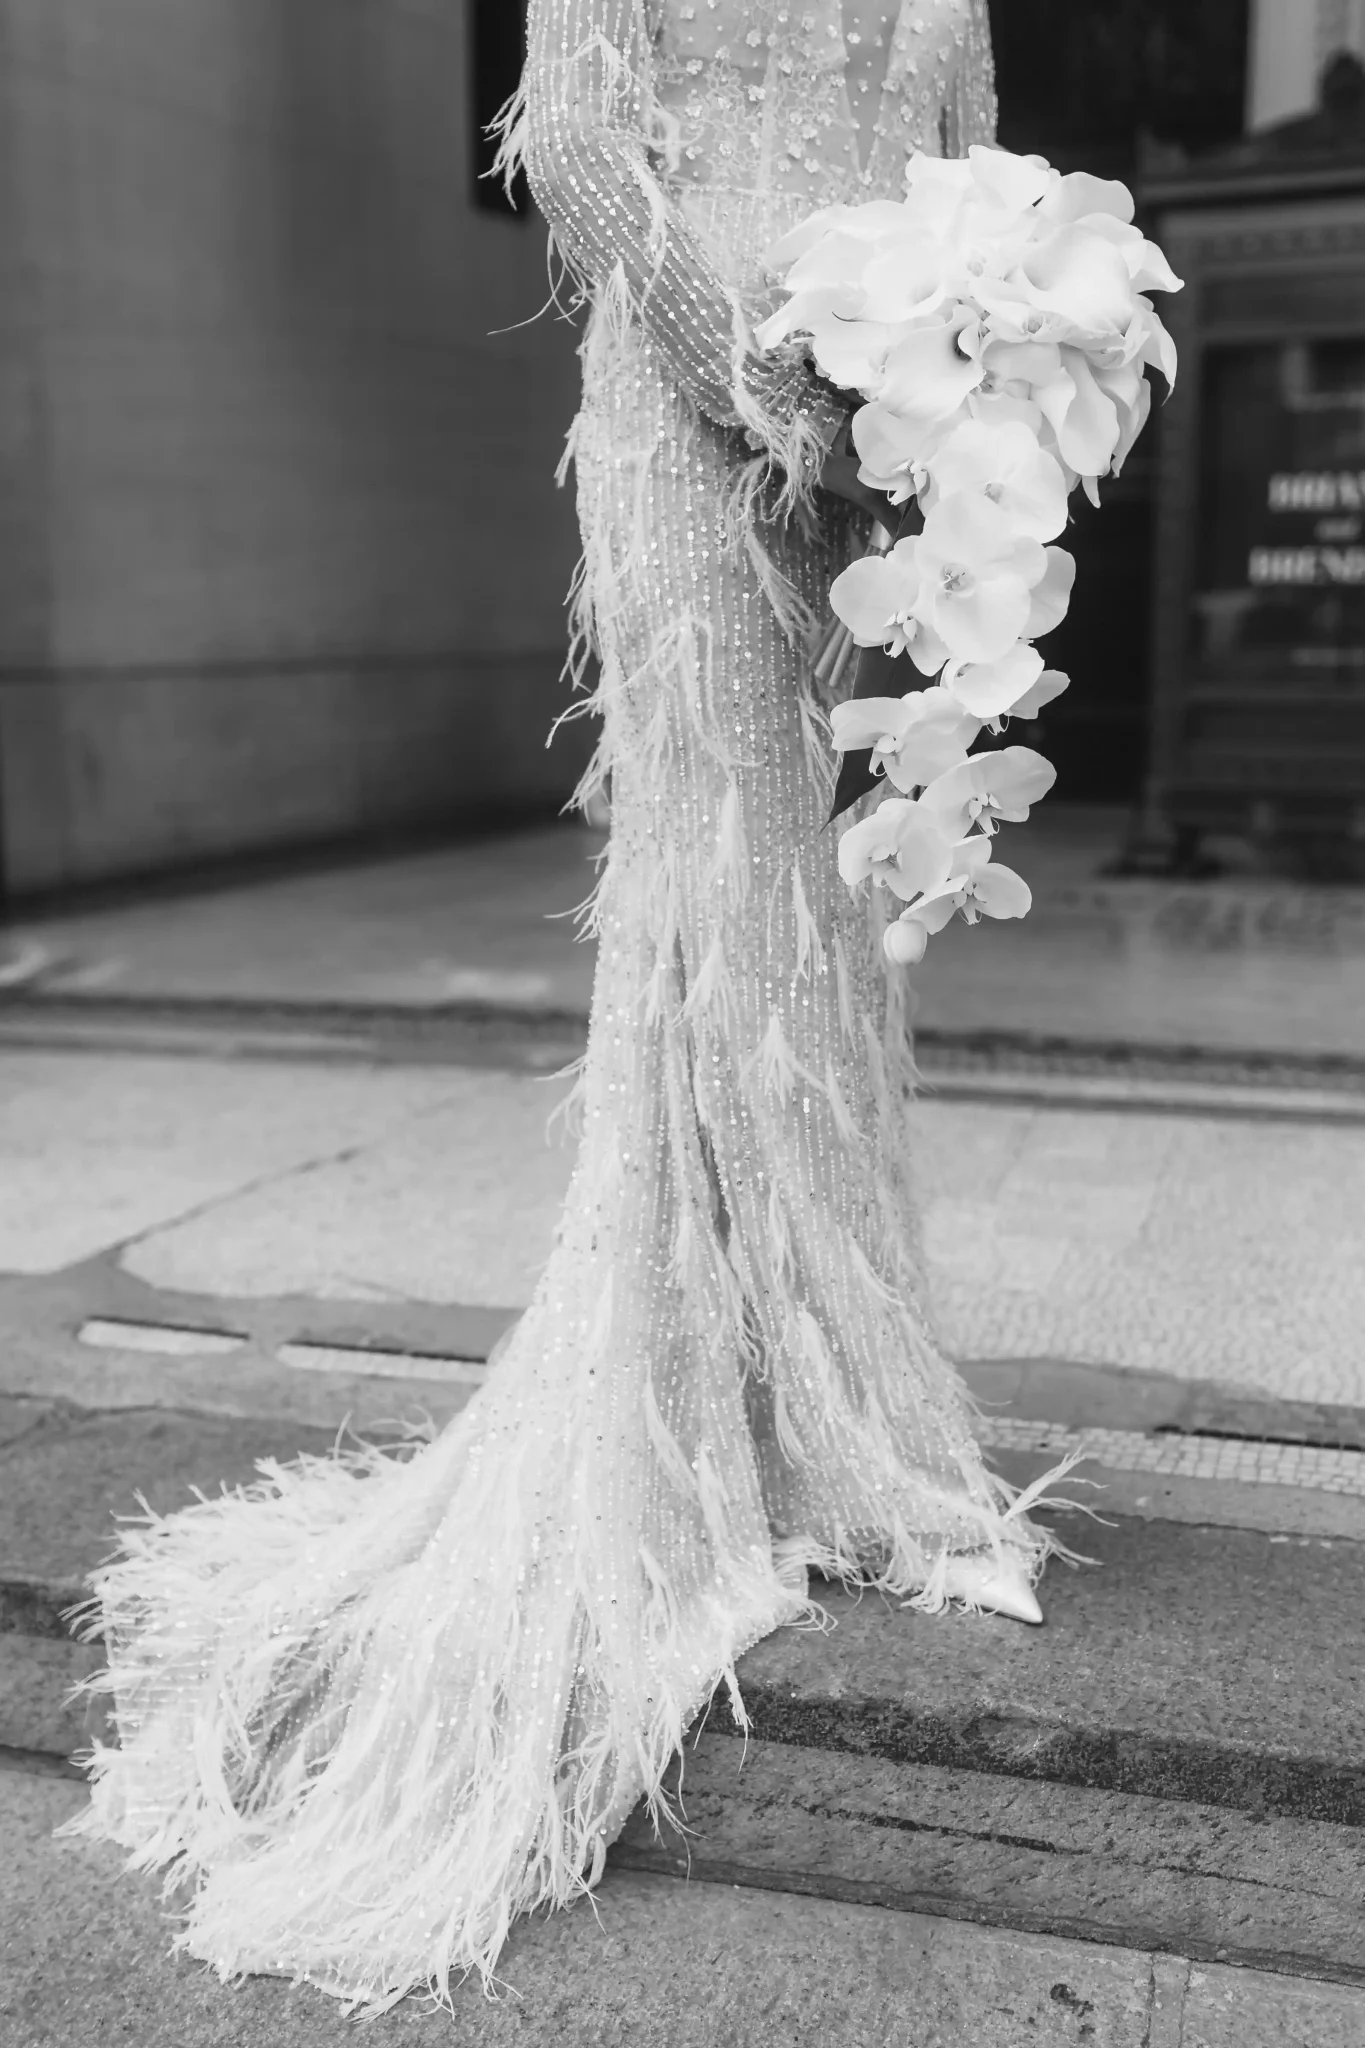 A bride in a feathered wedding dress poses for a photo.